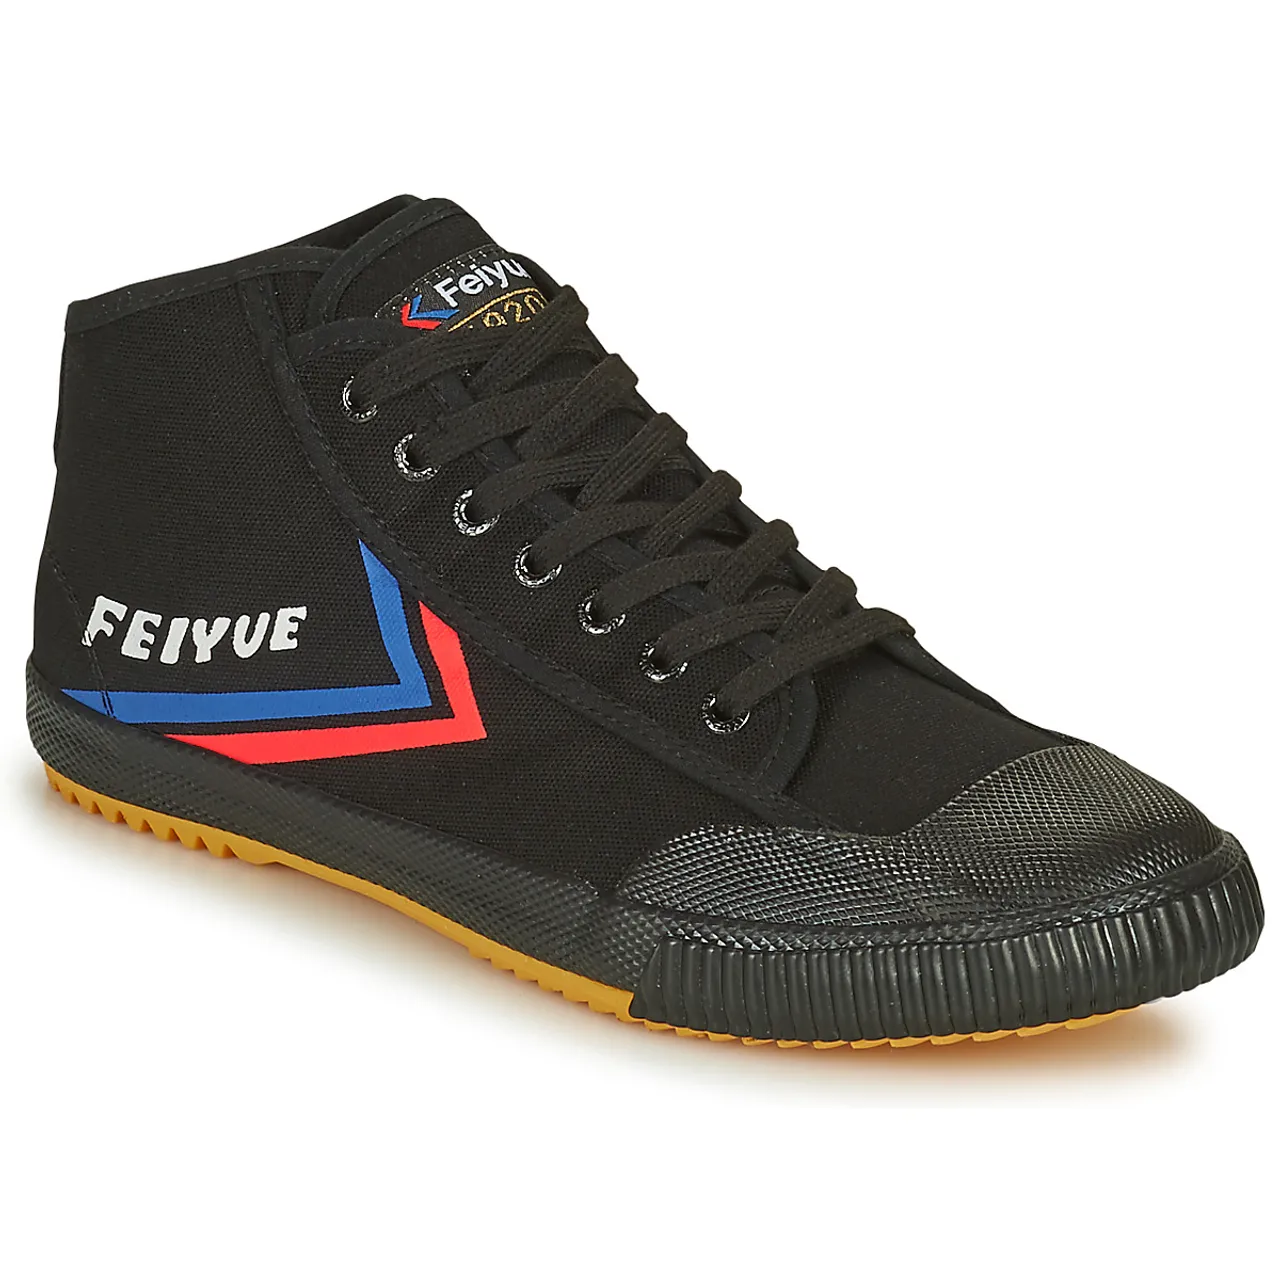 Feiyue  FE LO 1920 MID  women's Shoes (High-top Trainers) in Black